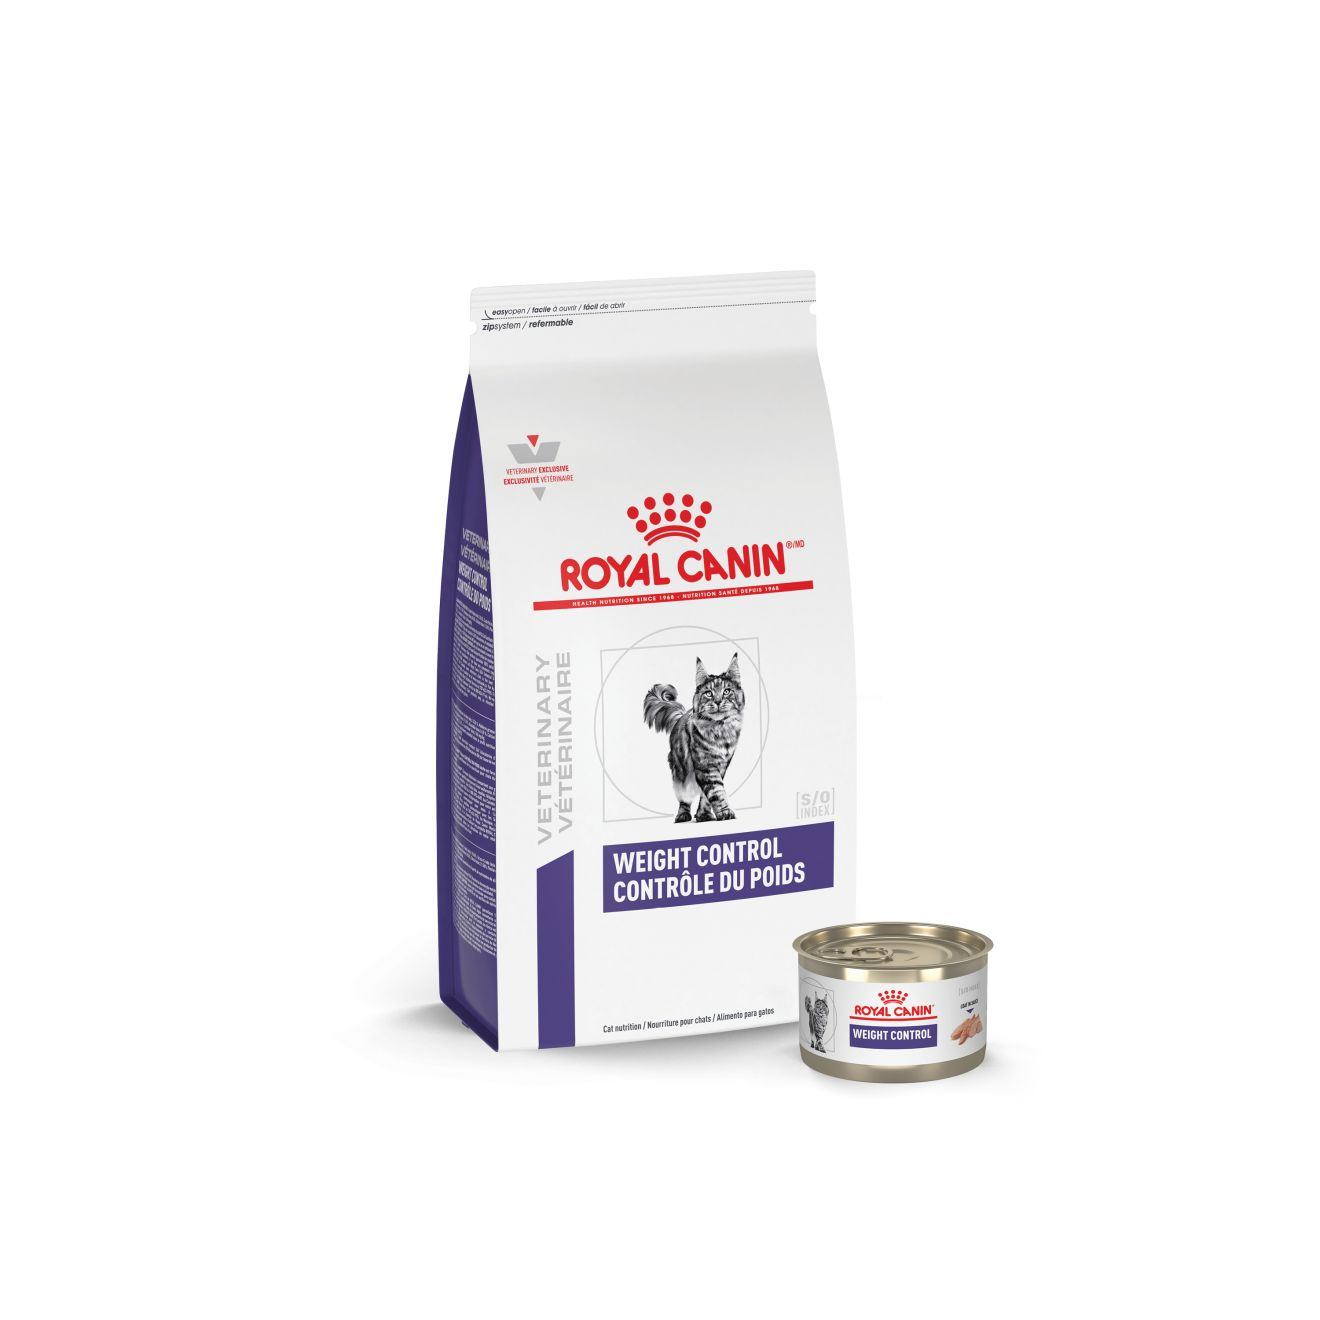 Packshot of Royal Canin Weight Control cat diets